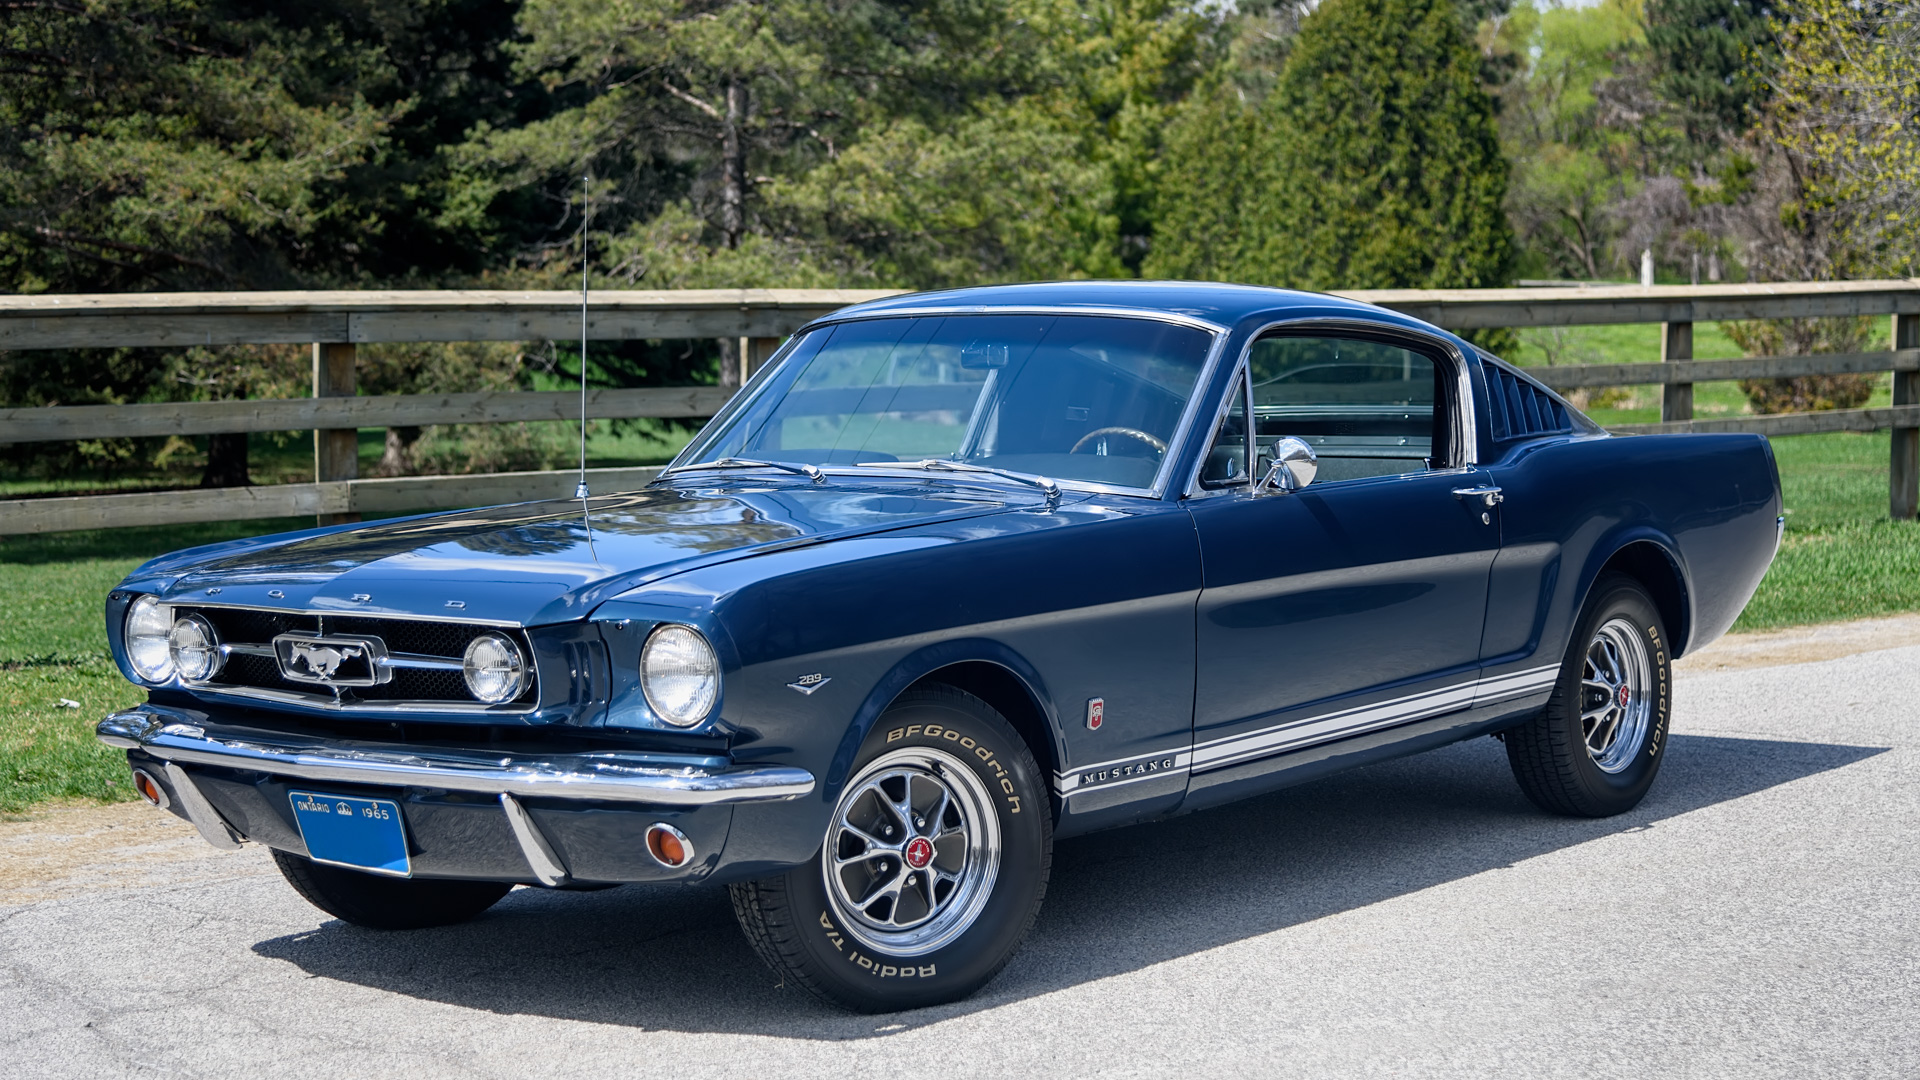 1965 Ford Mustang Gt Fastback Blue Car Classic Car Ford Ford Mustang 1920x1080